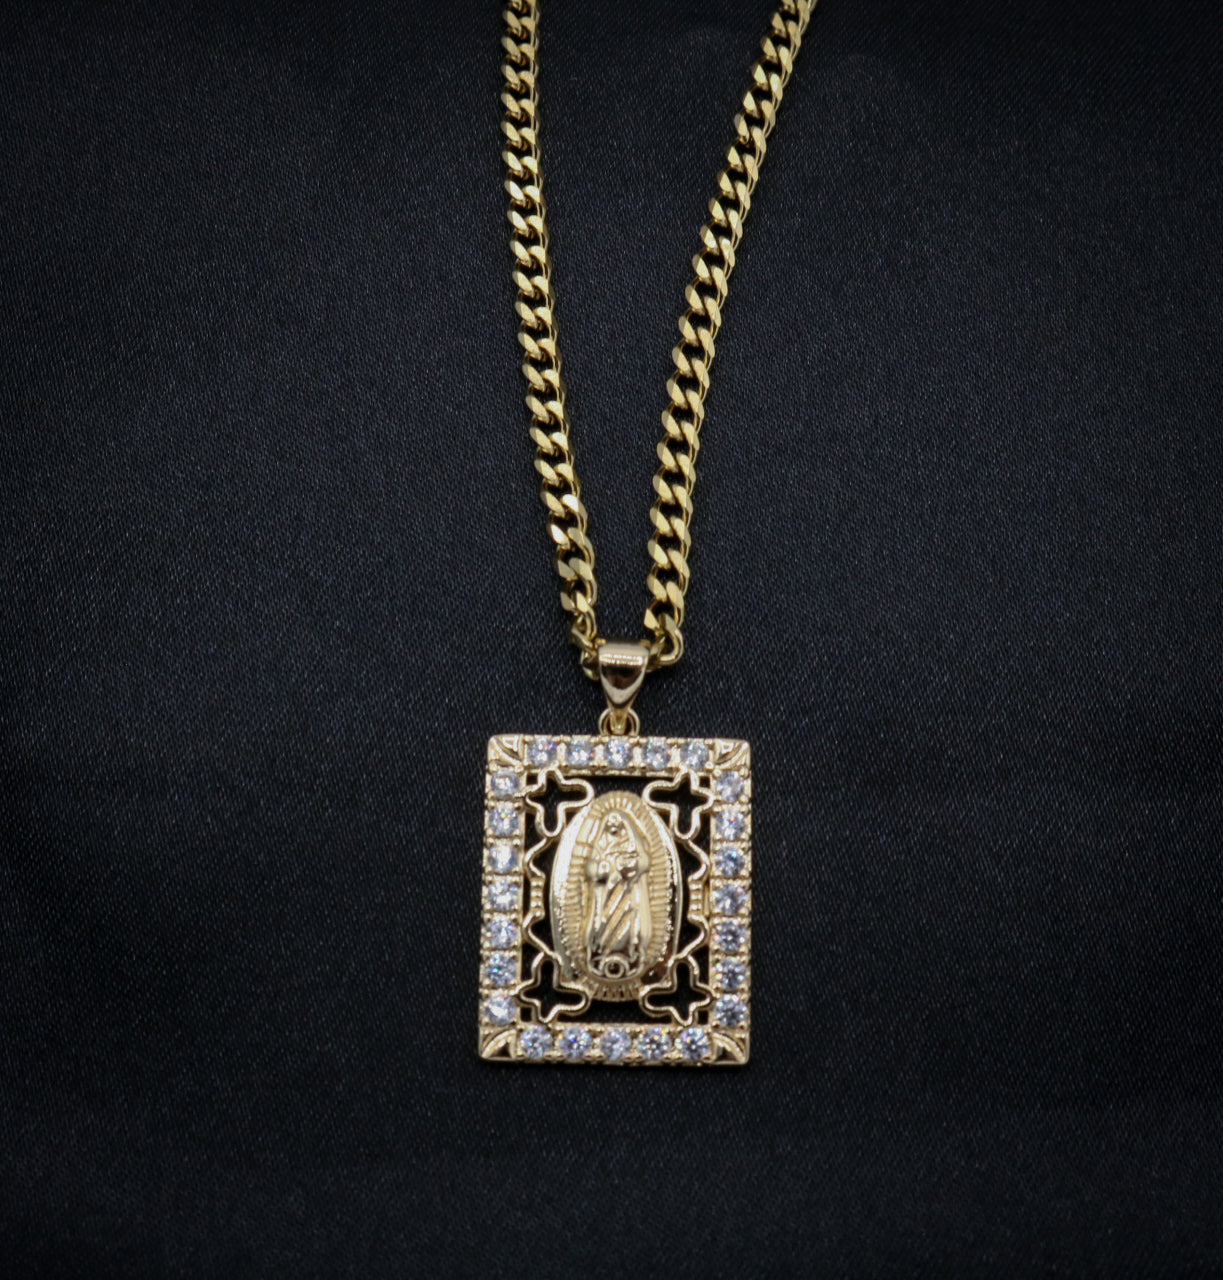 Virgin Mary Frame Necklace with stones